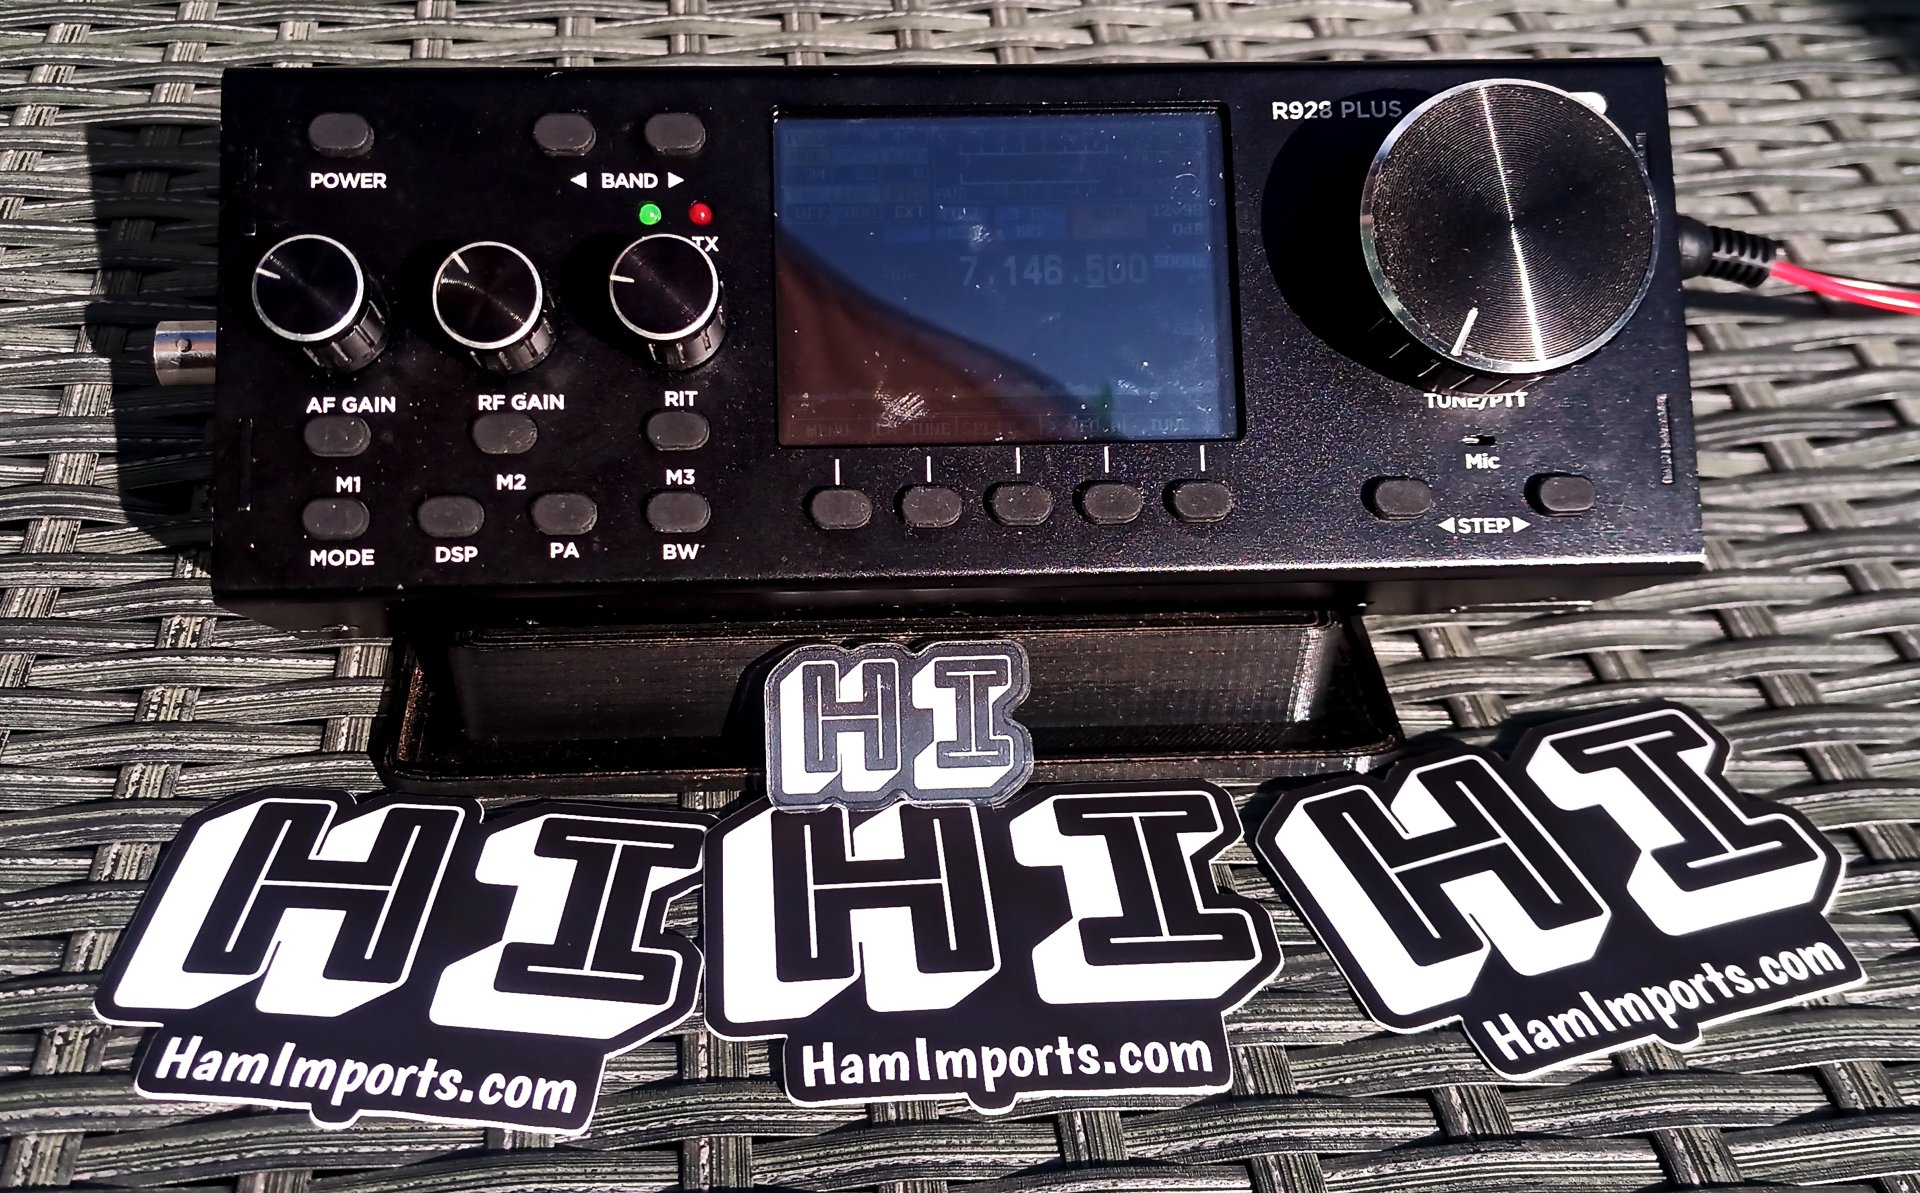 Ham Imports badge and stickers with an RS-928 radio